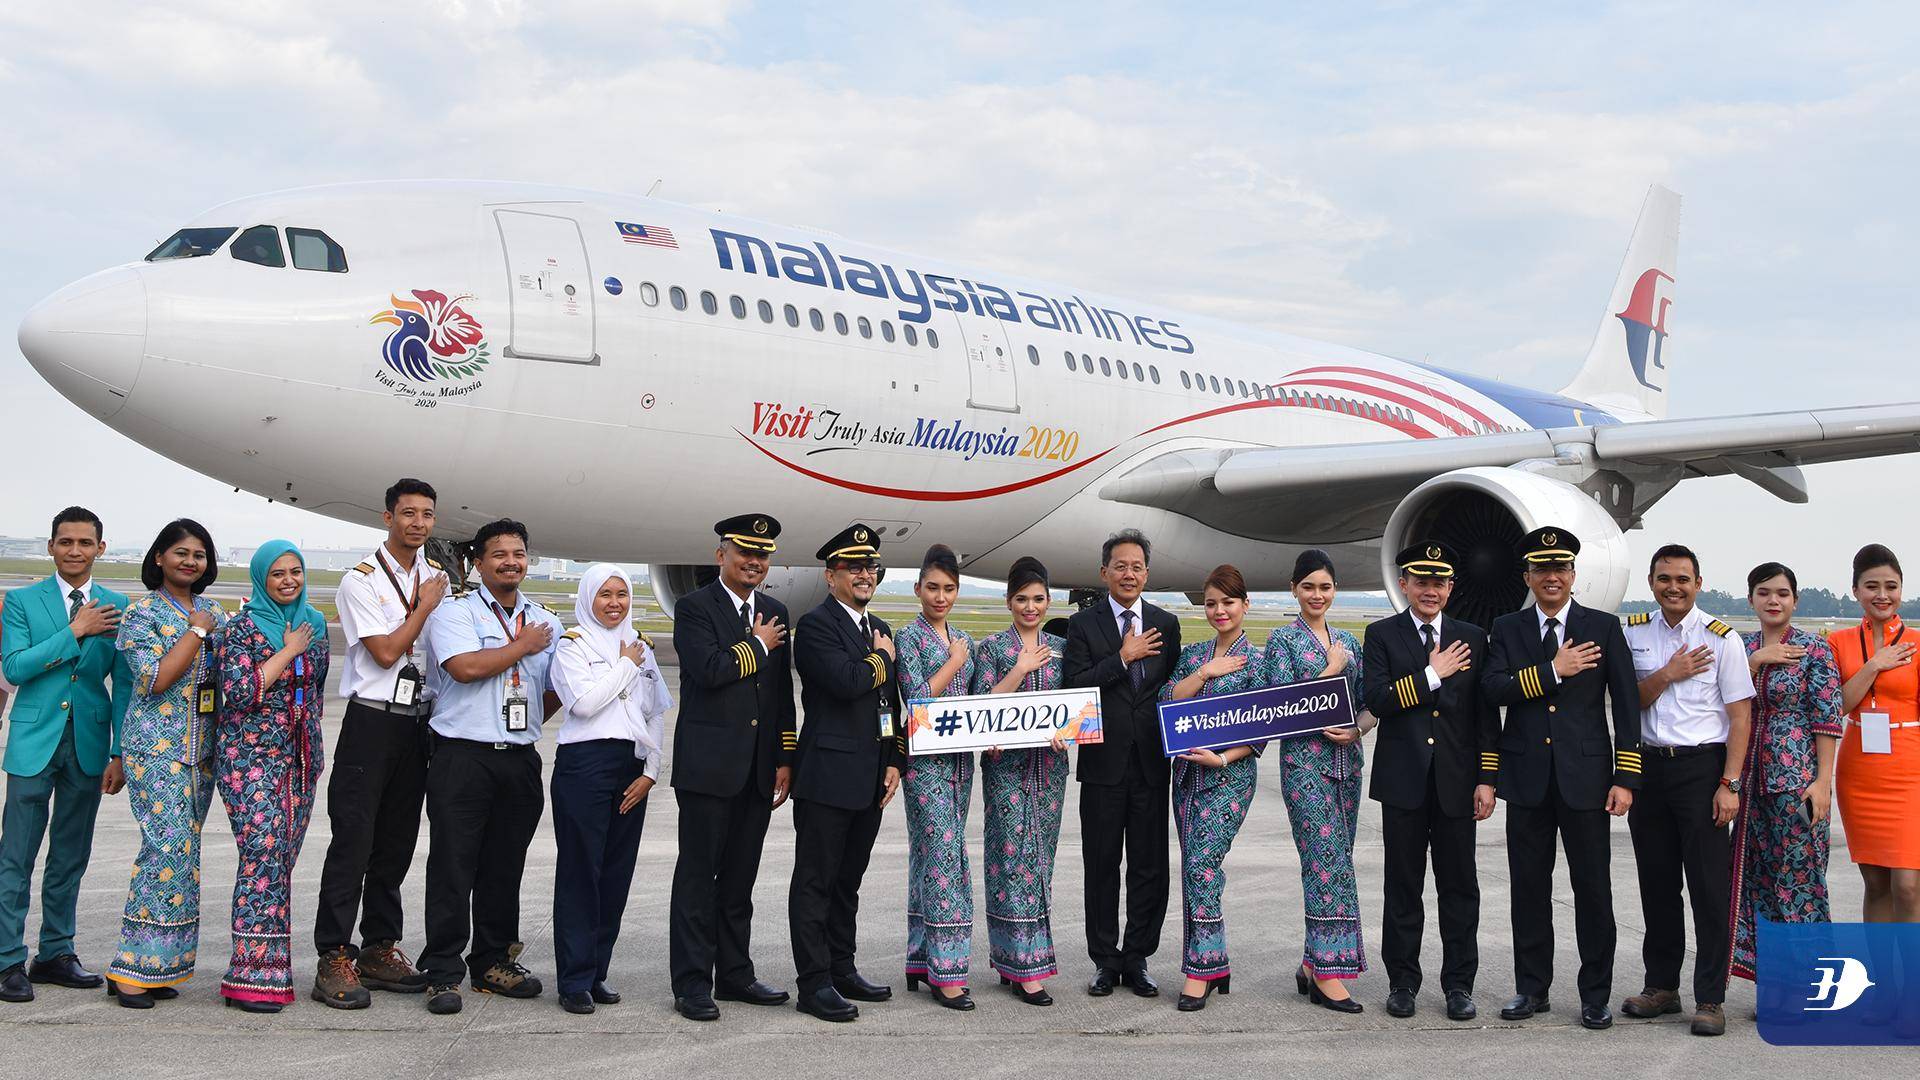 Флот malaysia airlines - malaysia airlines fleet - abcdef.wiki